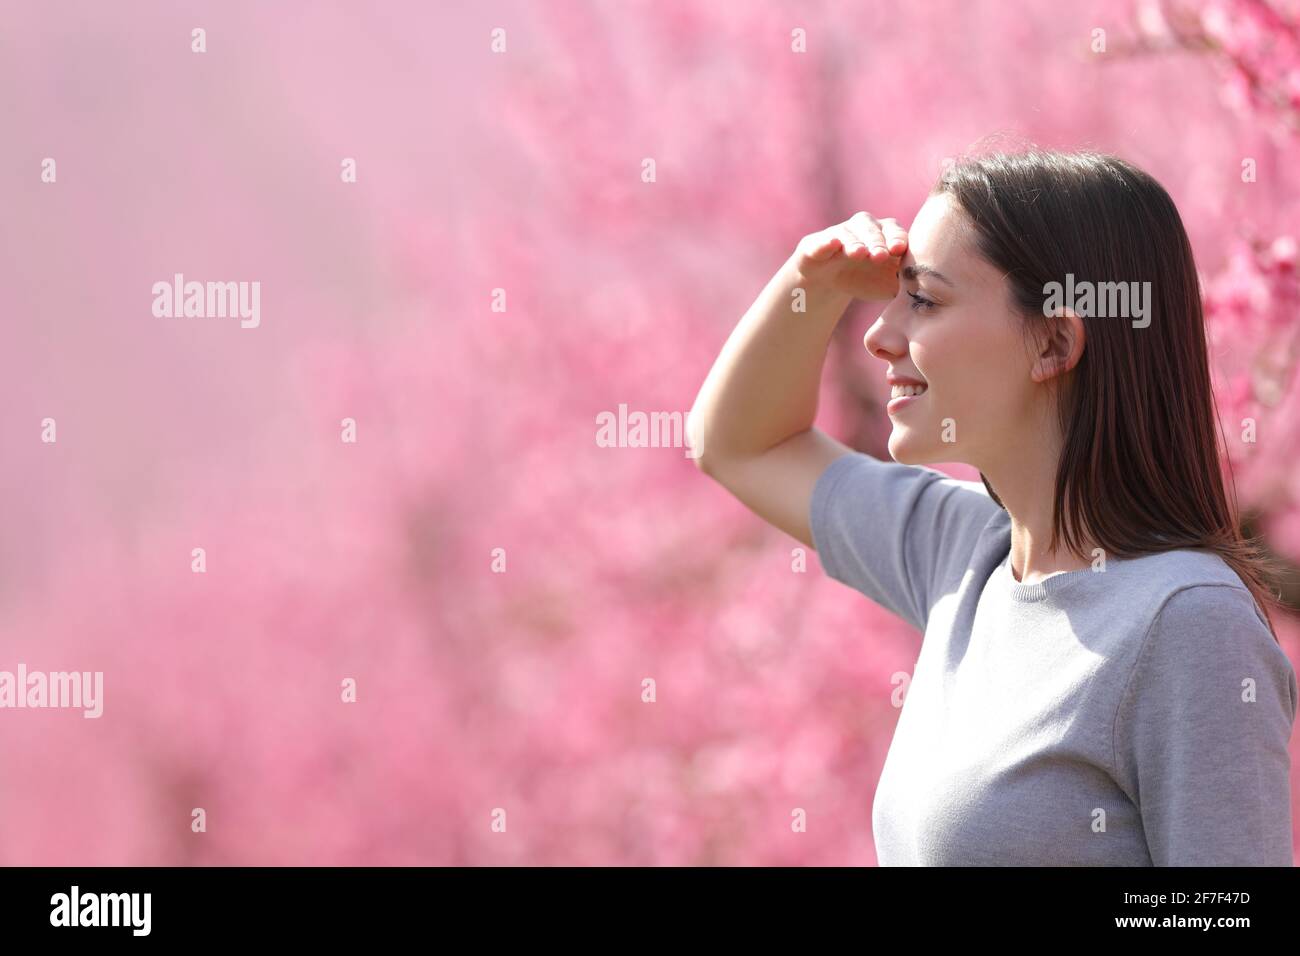 Side view portrait of a happy woman searching looking away protecting from sun with her hand in a pink flowered field Stock Photo